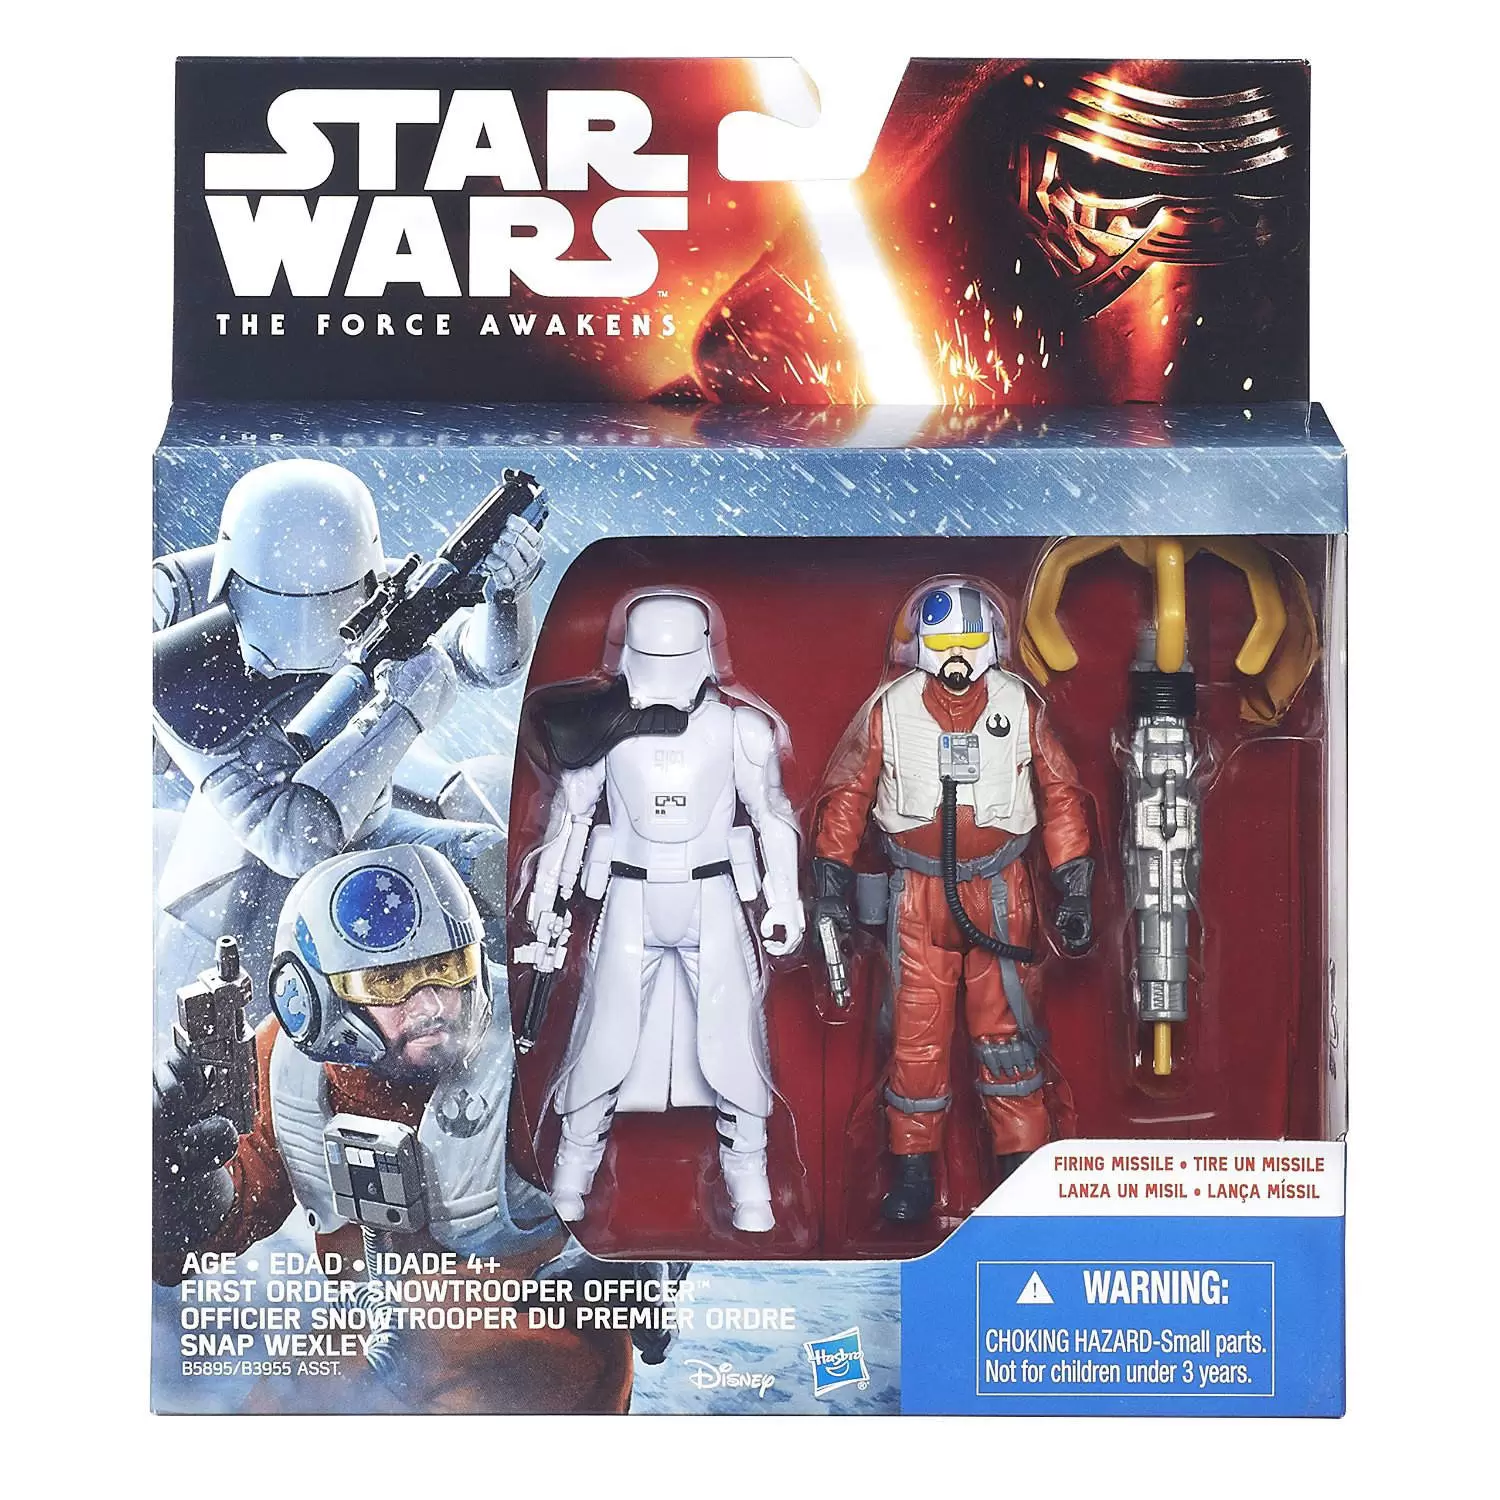 The Force Awakens - First order Snowtrooper Officer & Snap Wexley